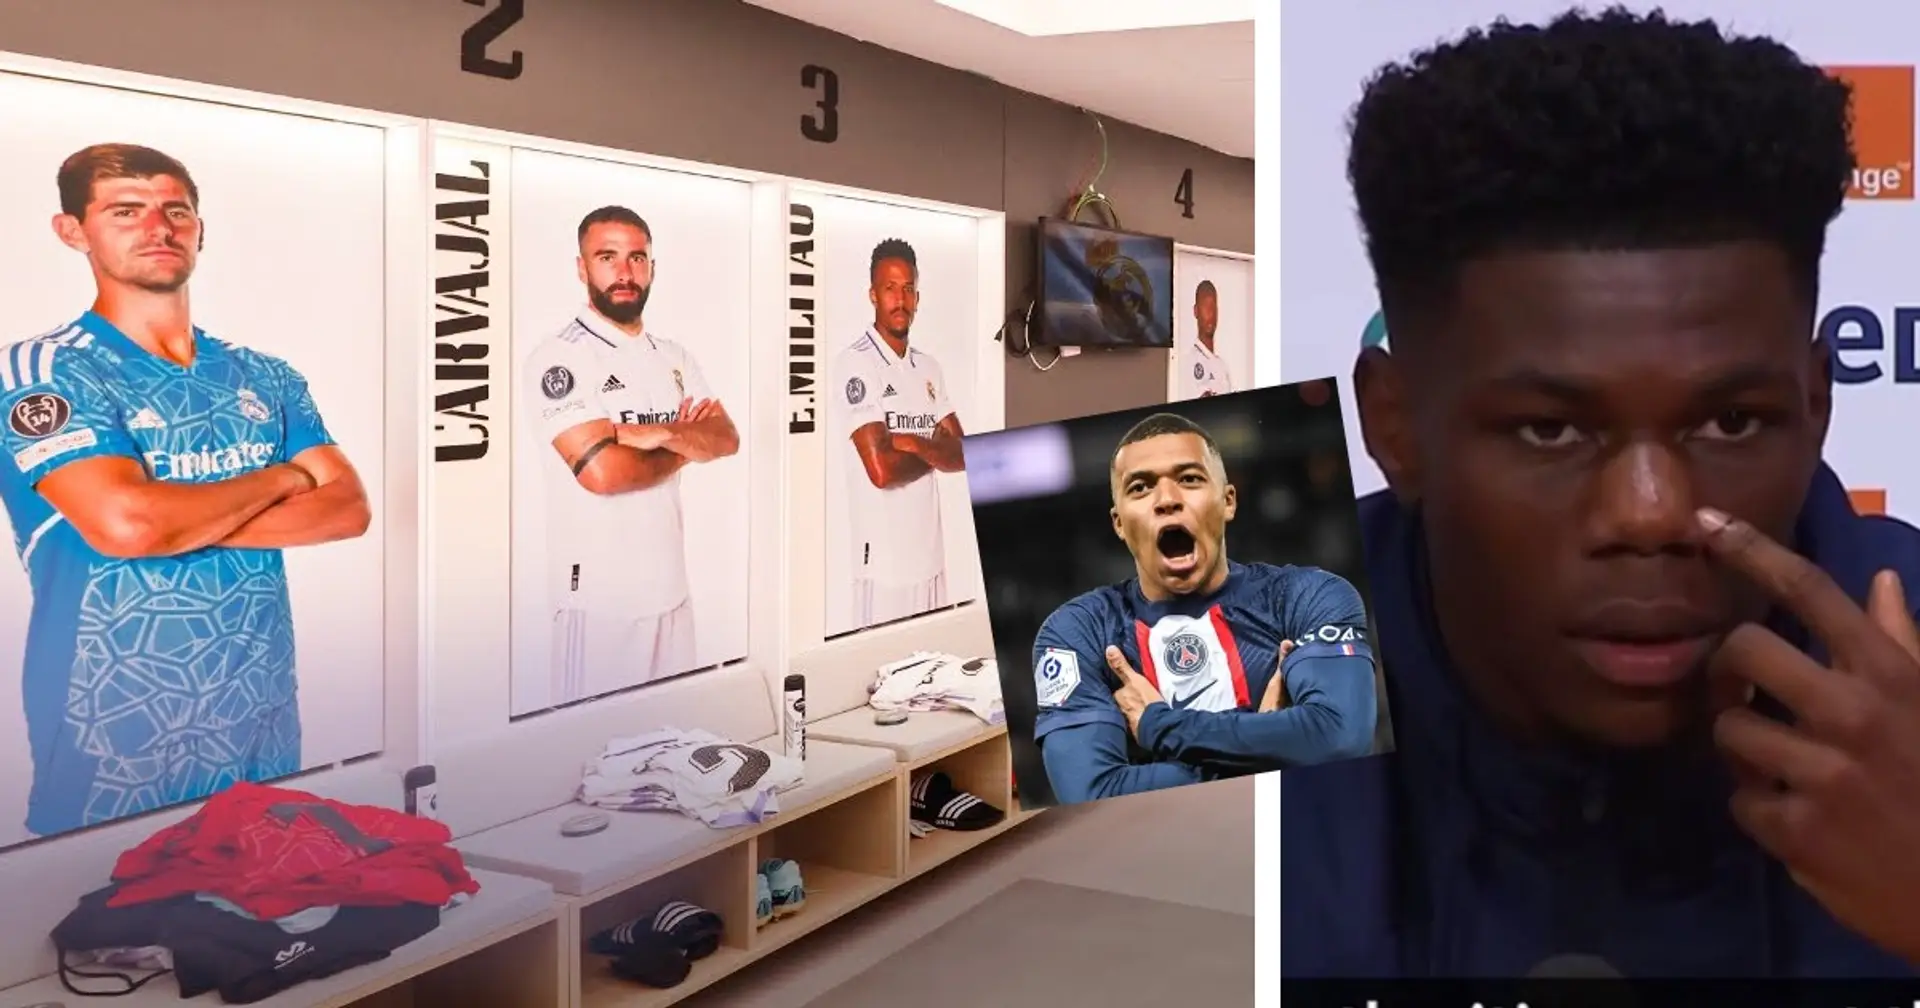  'We talk about it in the locker room': Tchouameni reveals what Real Madrid players think of Mbappe